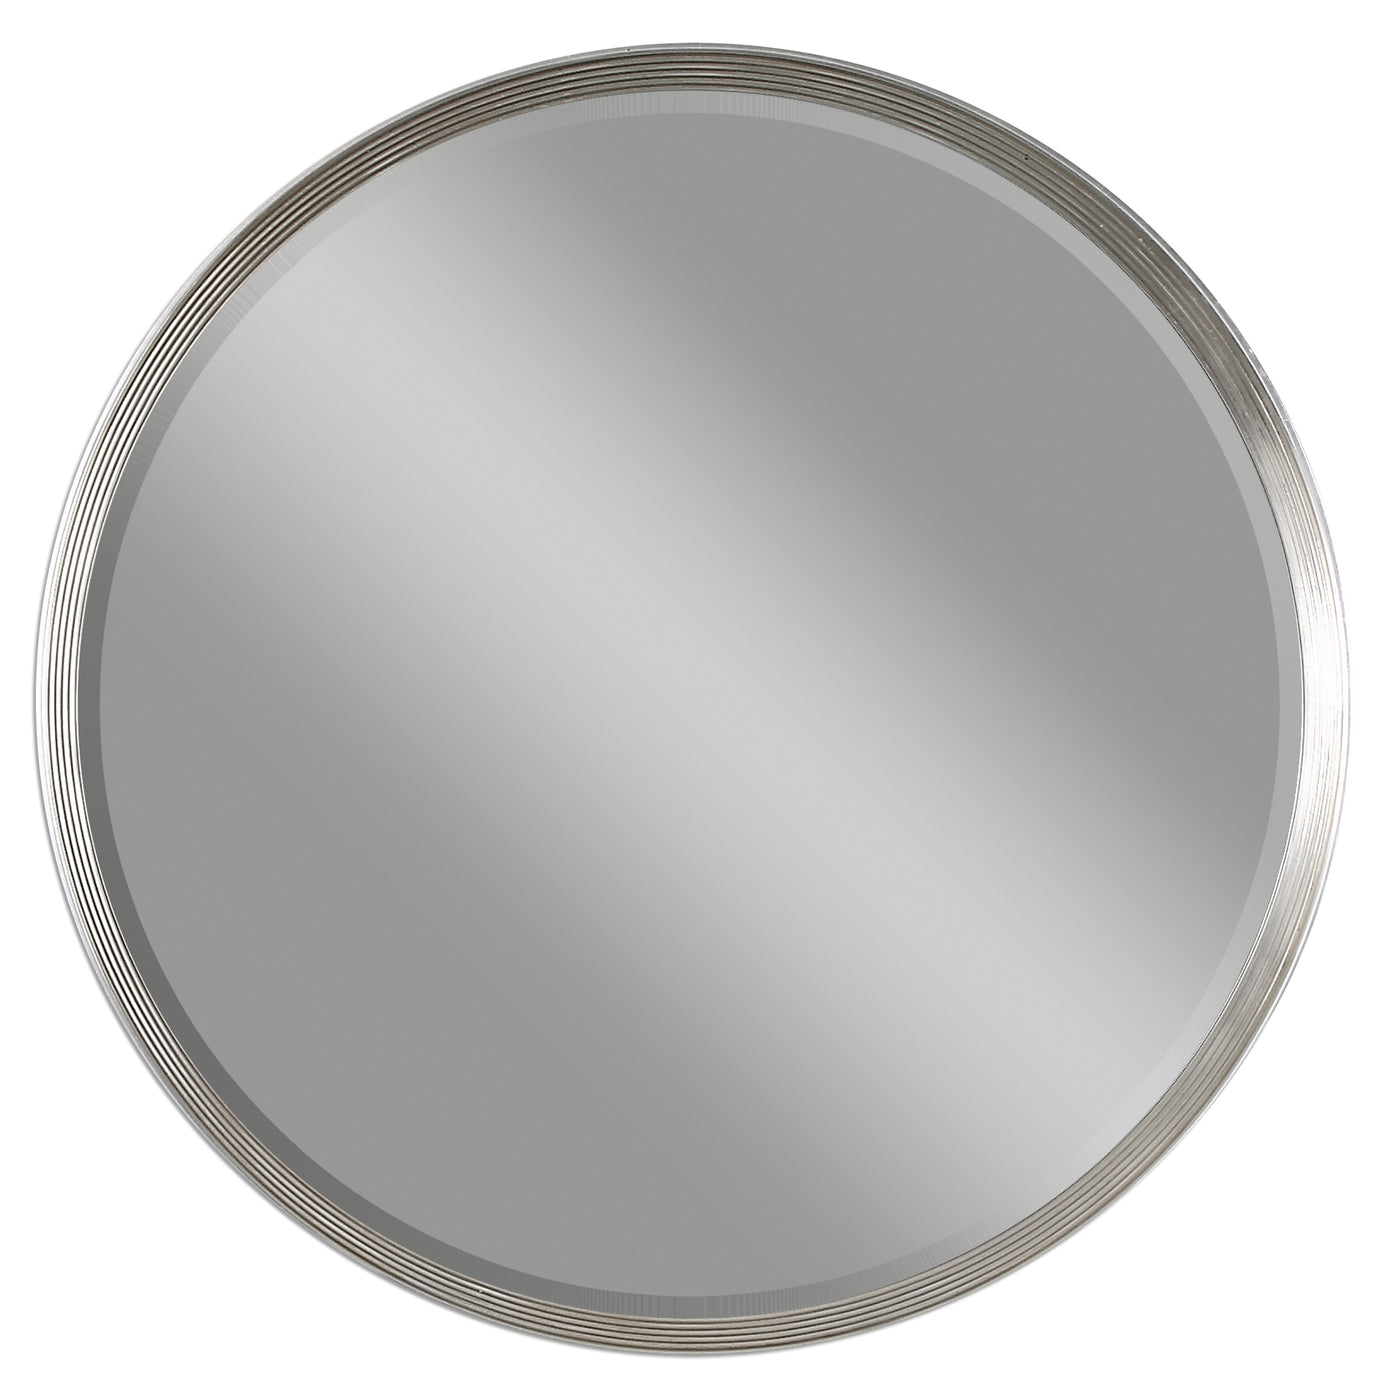 Frame Features A Stepped Profile With Silver Leaf Finish And Black Outer Edge. Mirror Has A Generous 1 1/4" Bevel.